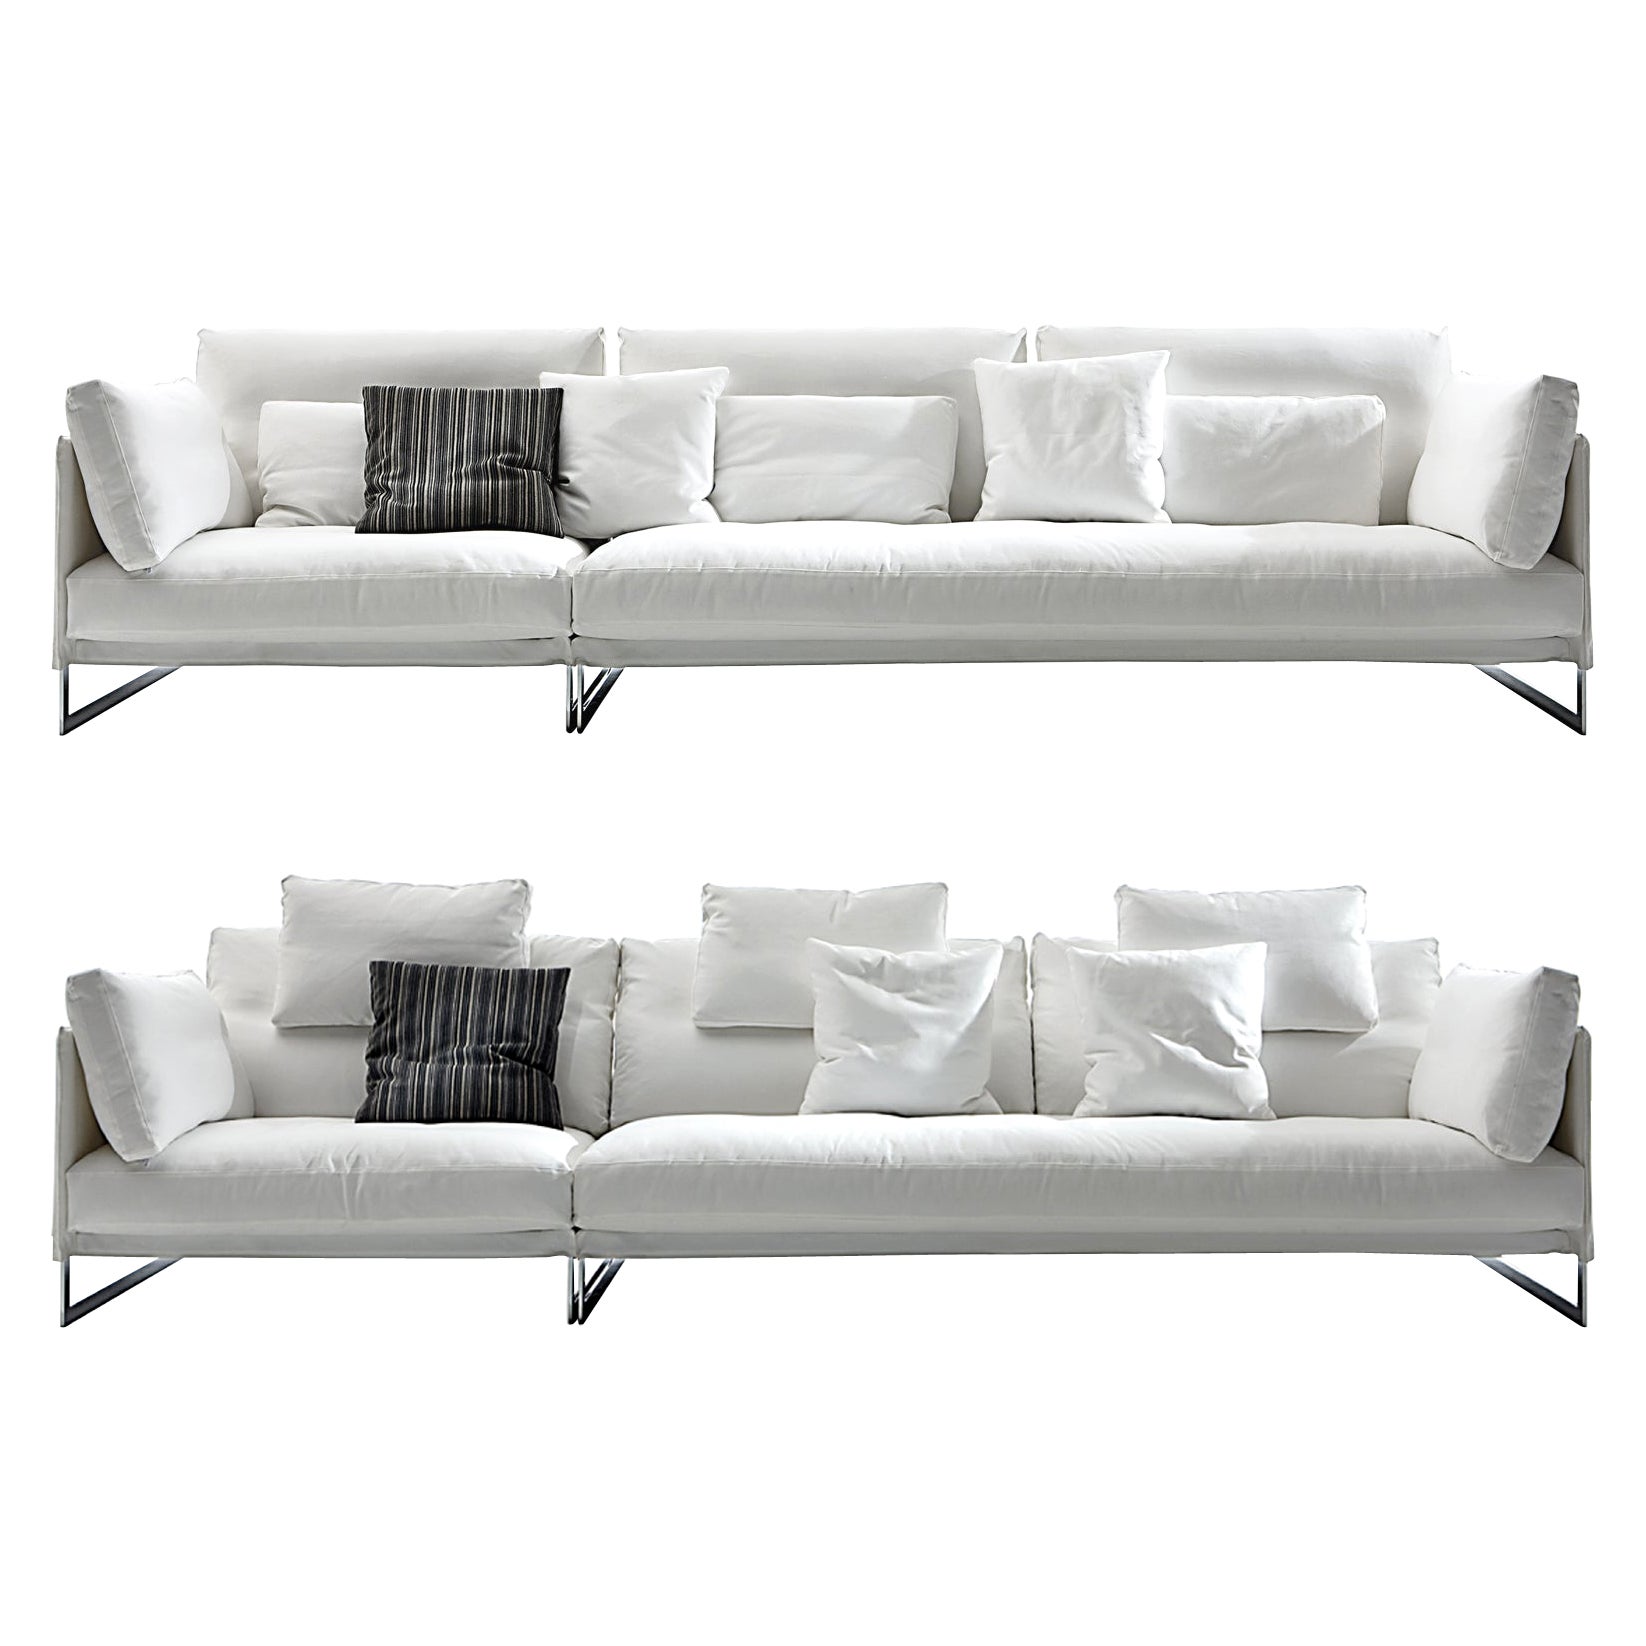 Livingston Large Sofa in Lusso White Upholstery with Chrome by Giuseppe Viganò